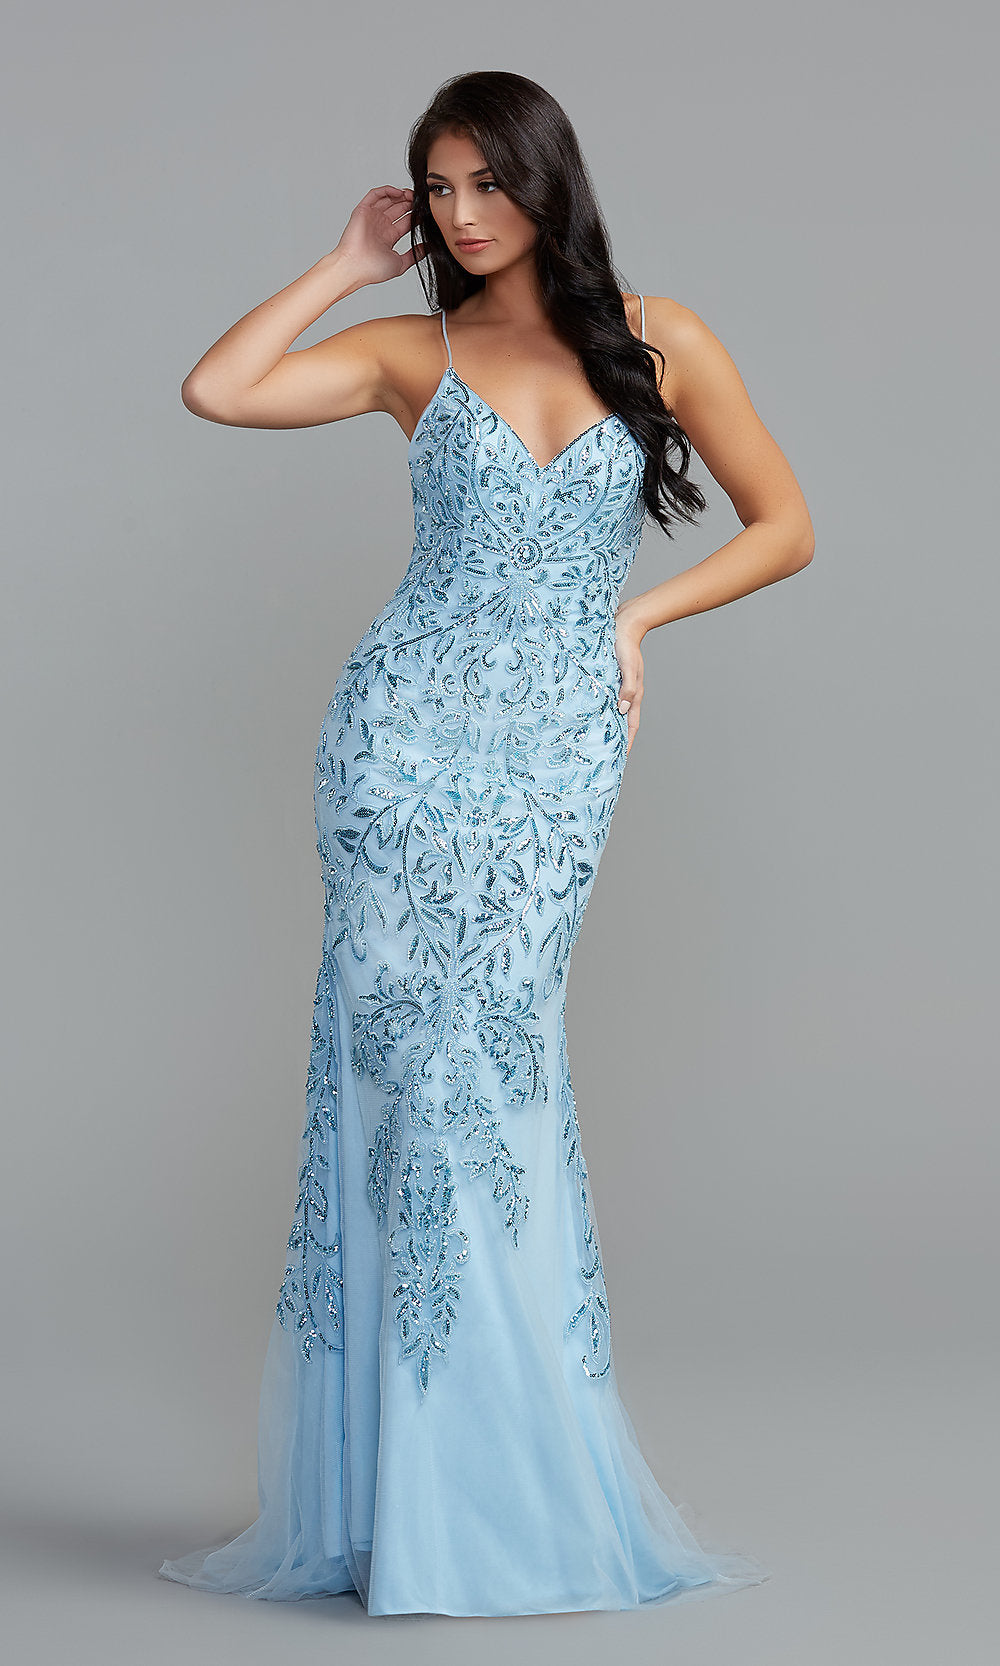 Long Sequin Prom Dress with Lace-Up Back - PromGirl